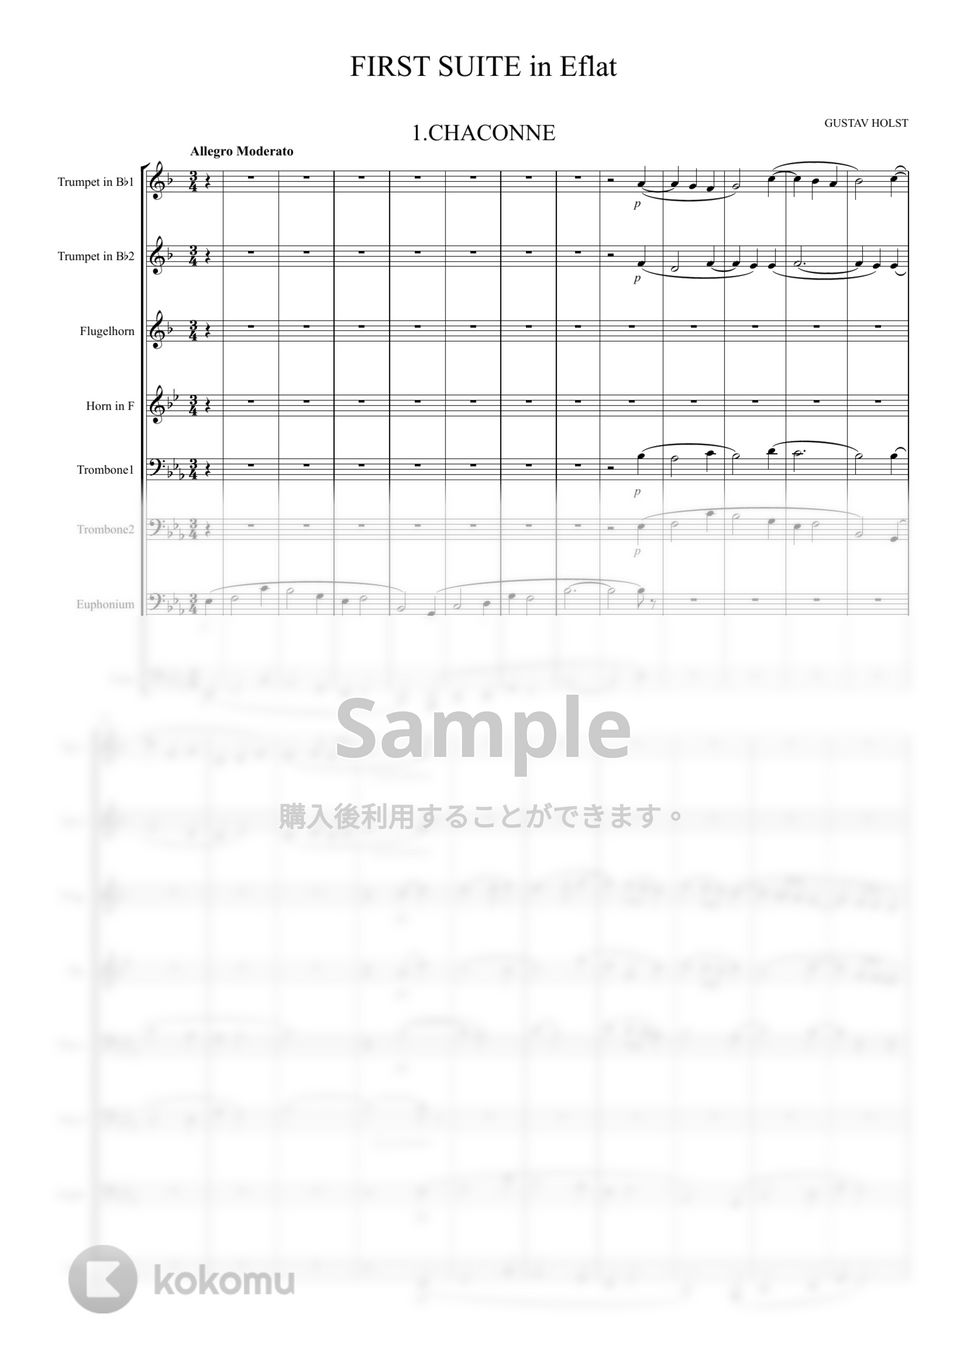 Gustav Holst - 吹奏楽のための第一組曲（Suite for Military Band） (金管八重奏) by マロニエミュージック